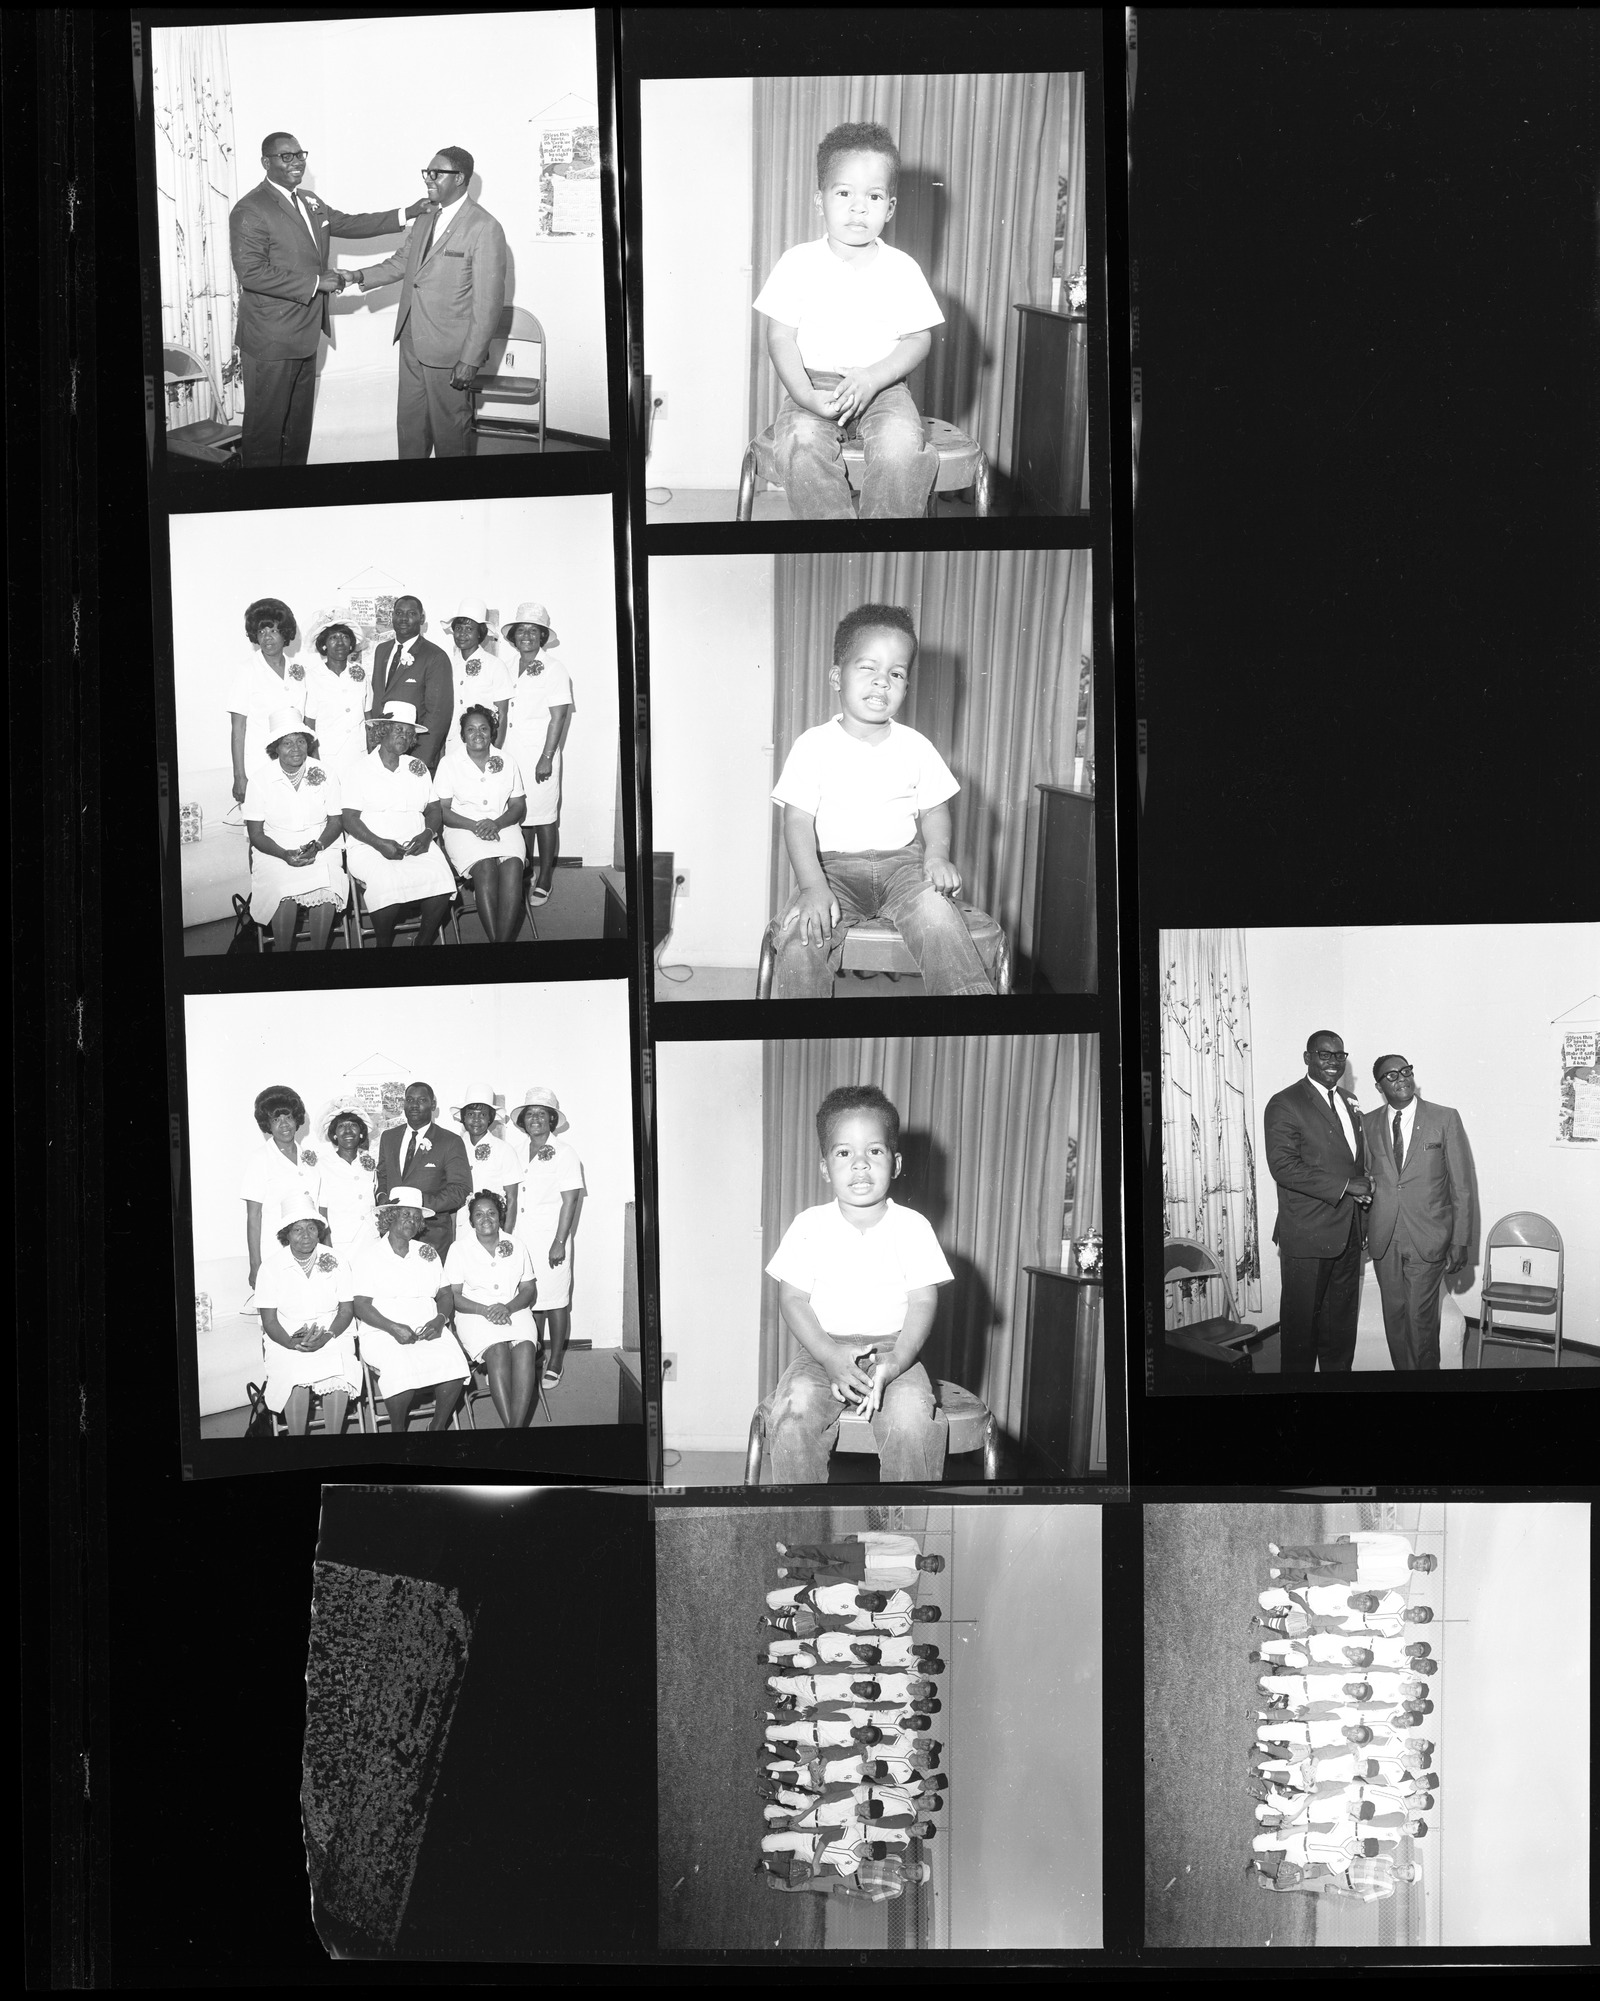 Set of negatives by Clinton Wright including wedding of Lenola Alexander, baseball team, Derick Scott, Reverend at New Jerusalem, Pastor's aid Club at N.J., and Clinton Wright with camera, 1968, page 1